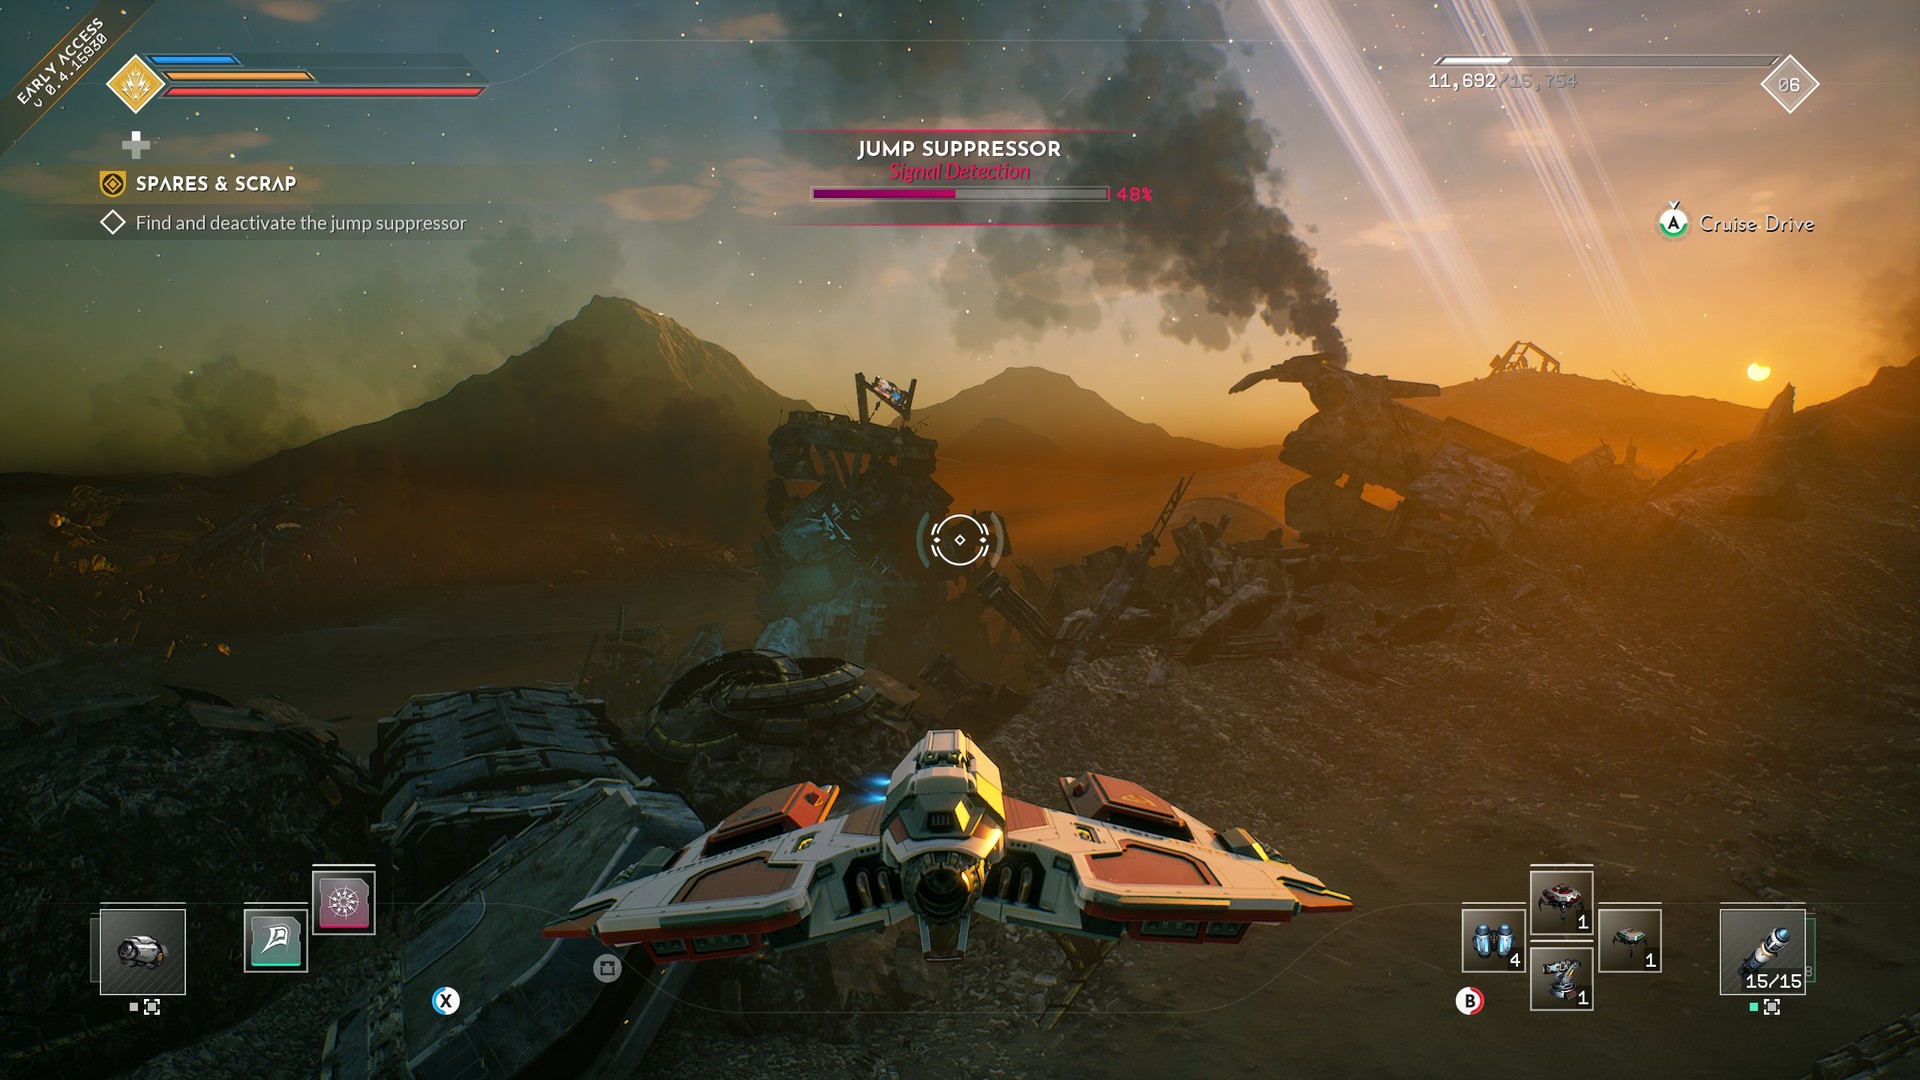 Everspace 2 enters early access - EGM